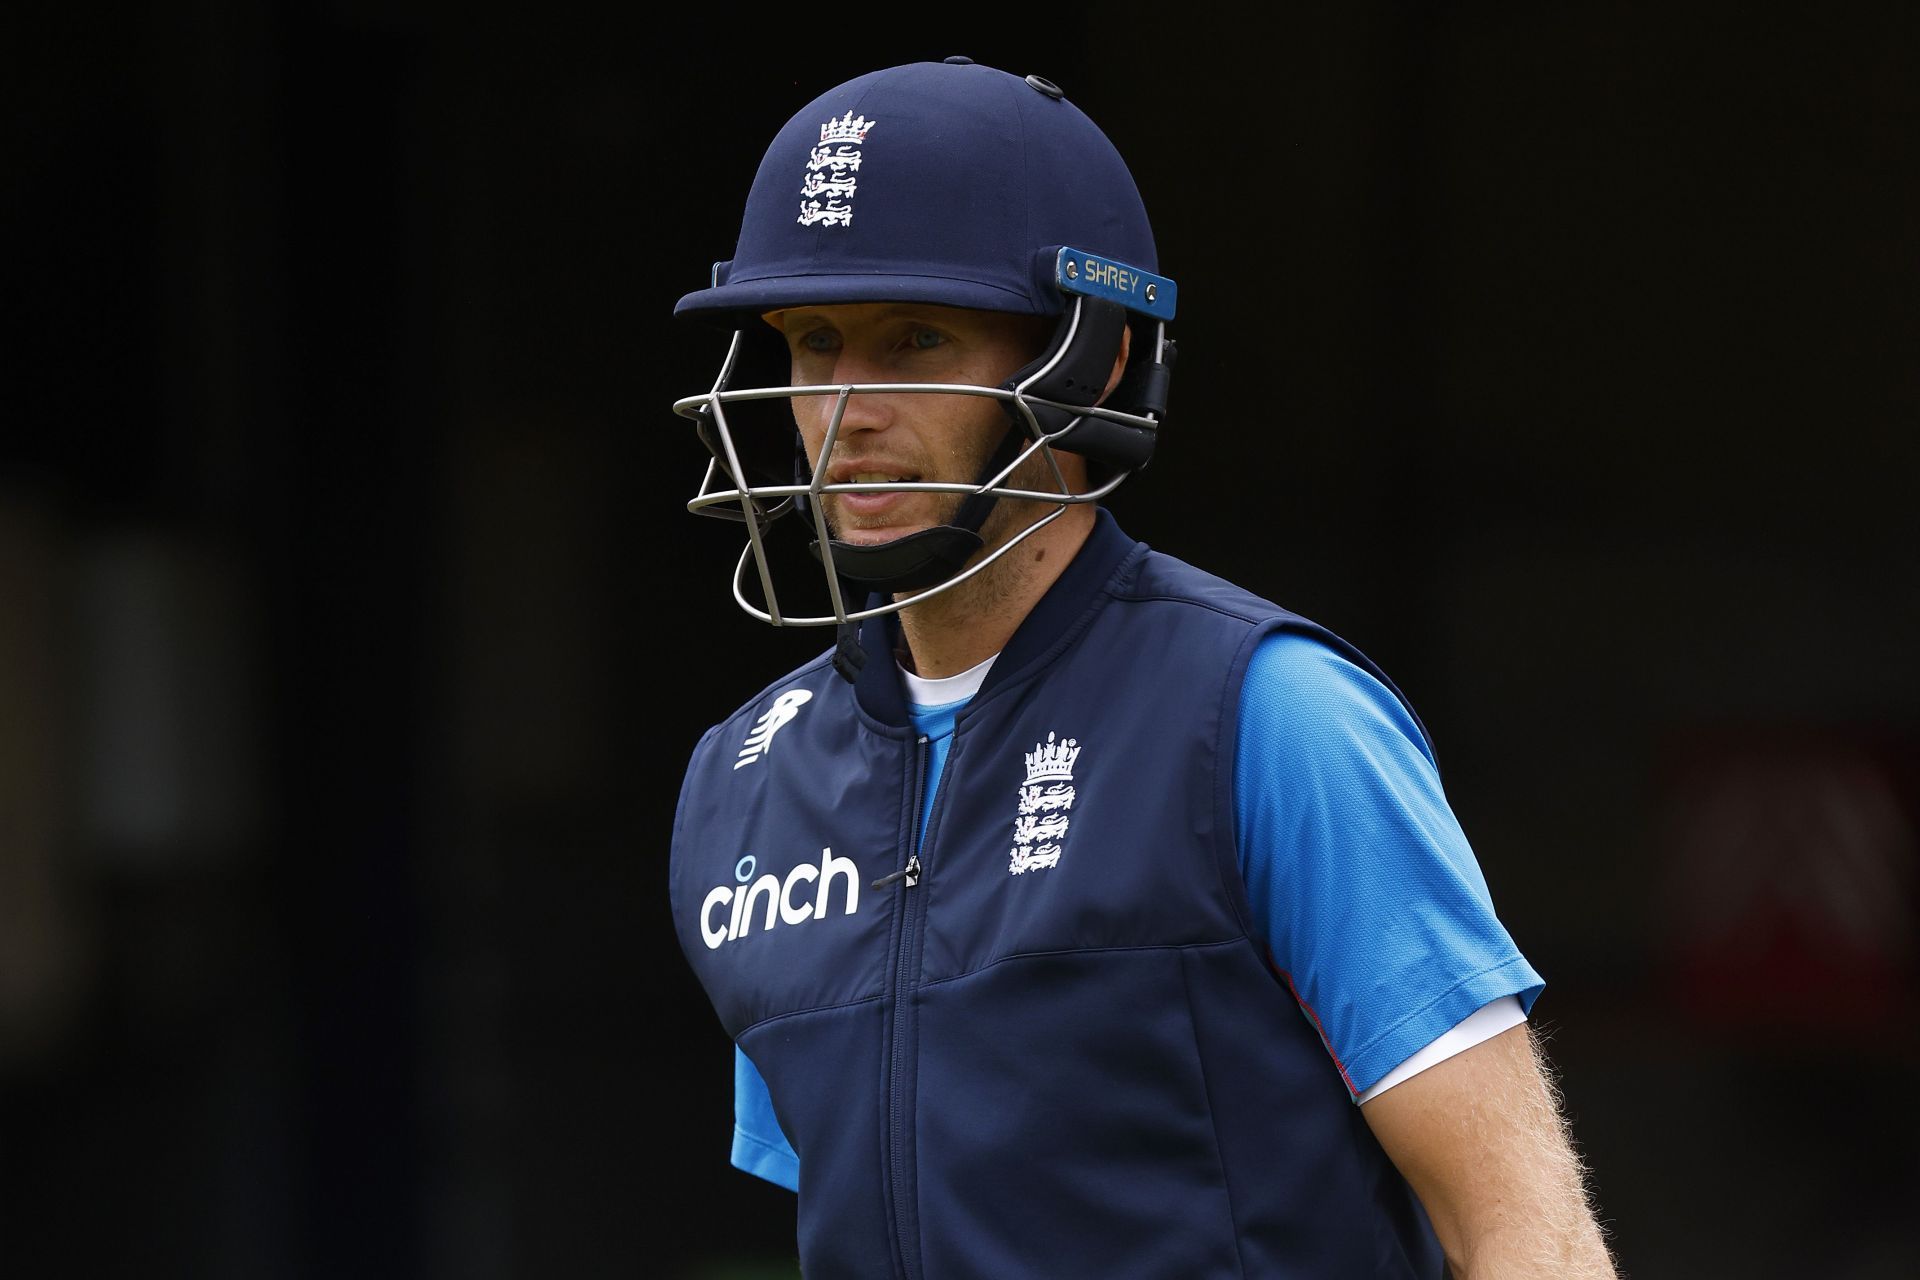 Joe Root needs to pull his troops together to avoid a third Ashes whitewash in recent times.